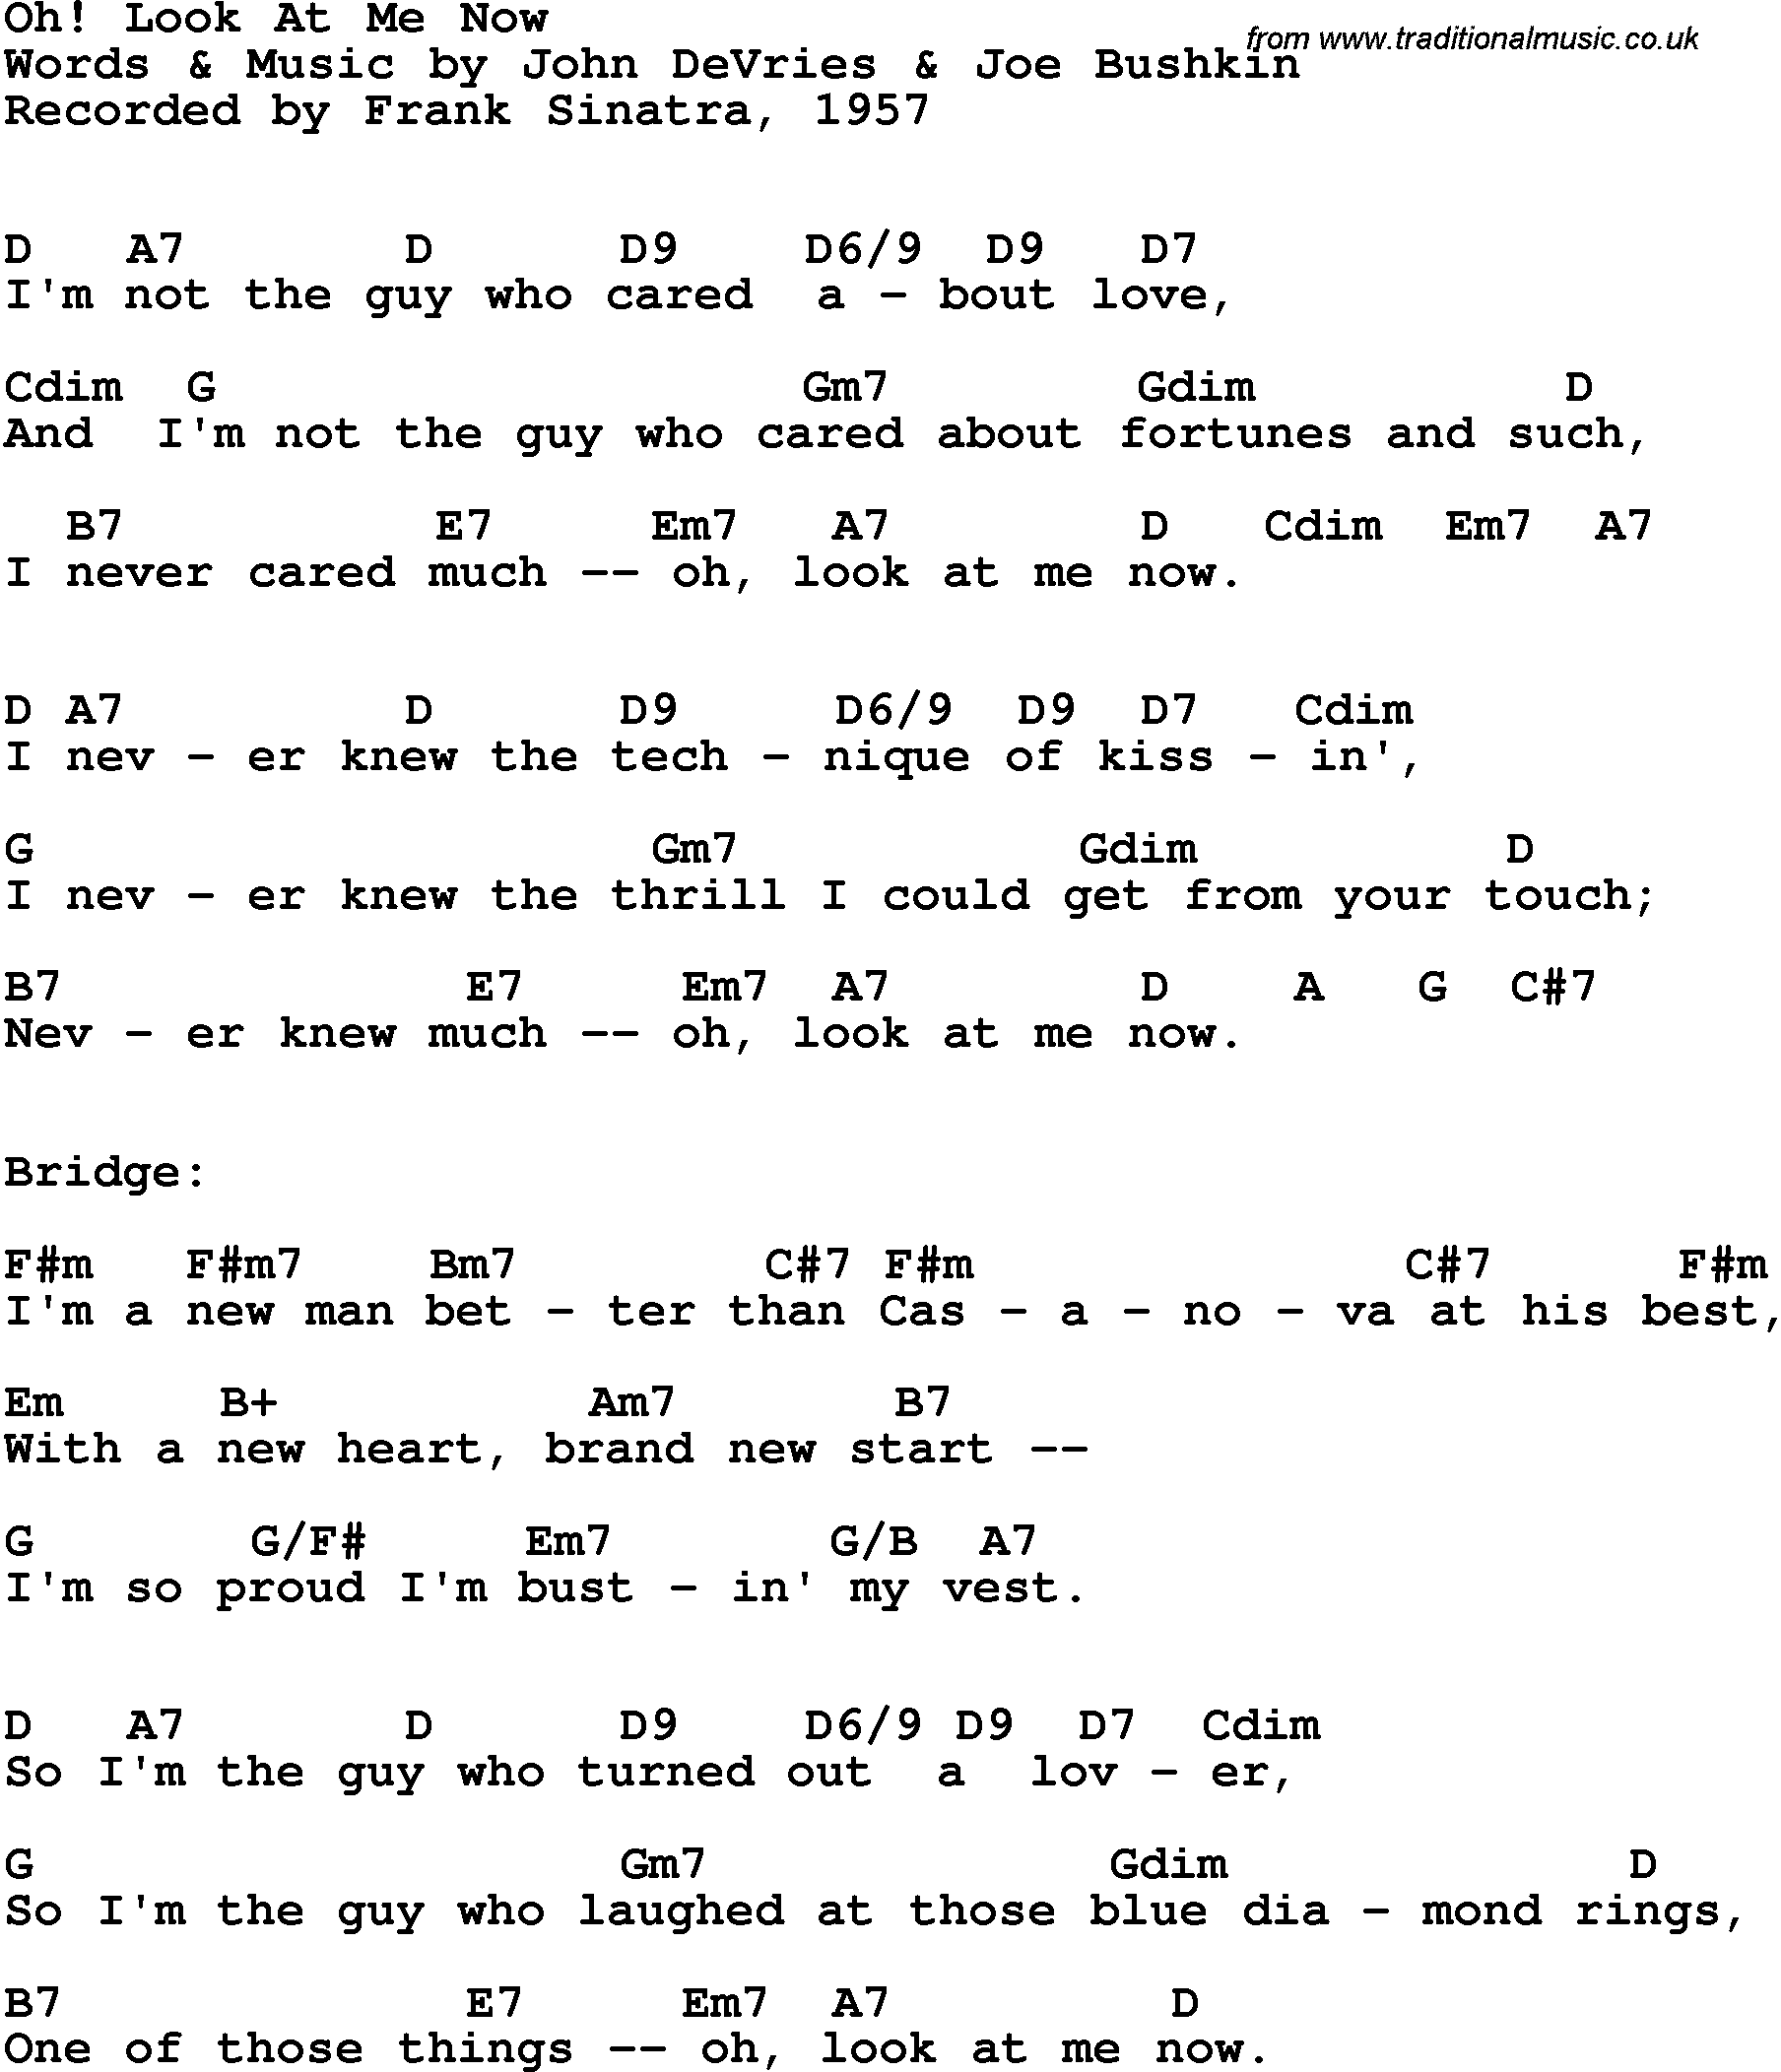 Song Lyrics with guitar chords for Oh! Look At Me Now - Frank Sinatra, 1957